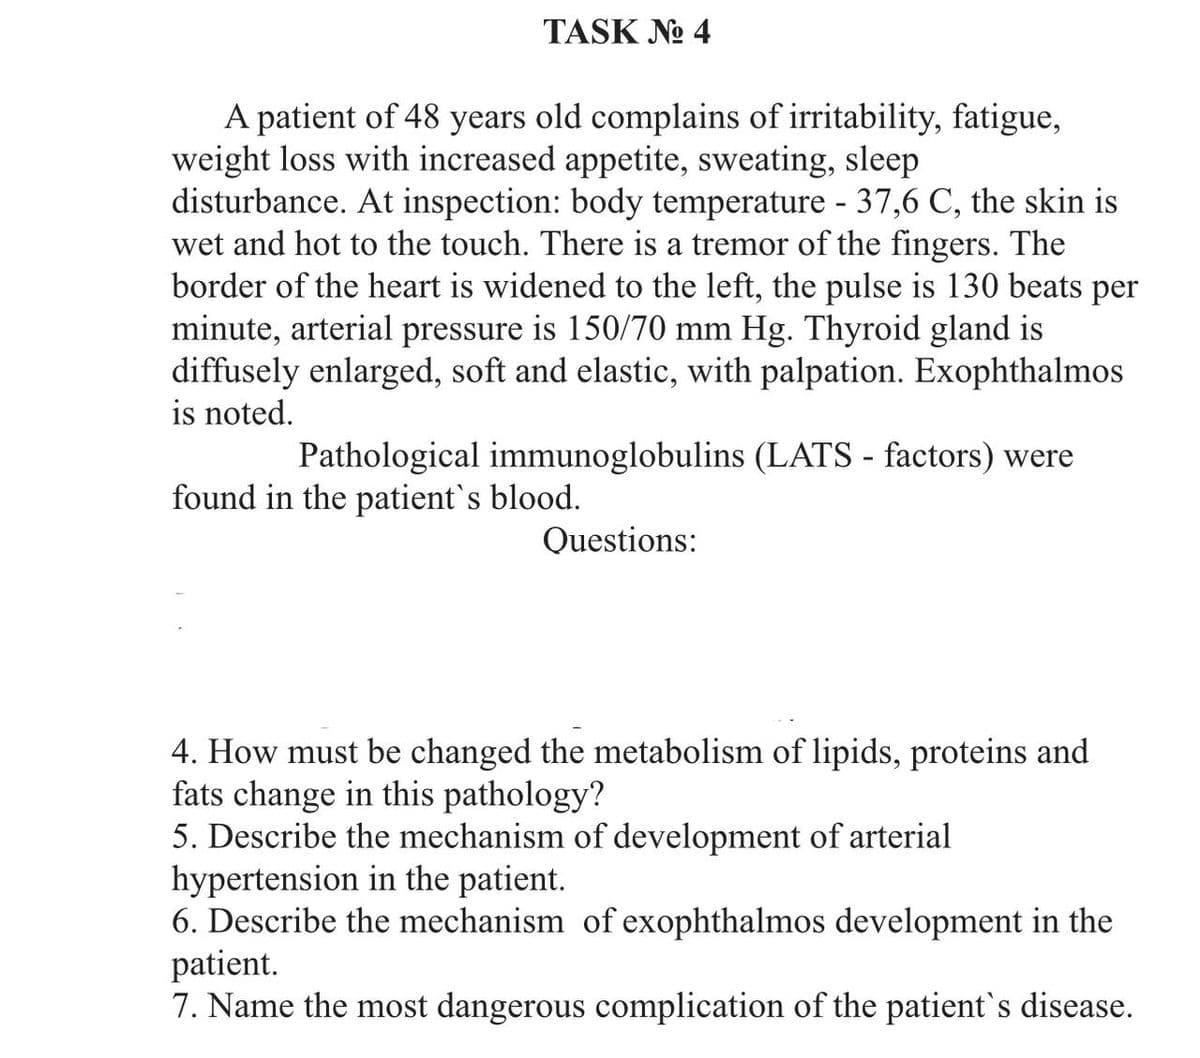 TASK No 4
A patient of 48 years old complains of irritability, fatigue,
weight loss with increased appetite, sweating, sleep
disturbance. At inspection: body temperature - 37,6 C, the skin is
wet and hot to the touch. There is a tremor of the fingers. The
border of the heart is widened to the left, the pulse is 130 beats per
minute, arterial pressure is 150/70 mm Hg. Thyroid gland is
diffusely enlarged, soft and elastic, with palpation. Exophthalmos
is noted.
Pathological immunoglobulins (LATS - factors) were
found in the patient's blood.
Questions:
4. How must be changed the metabolism of lipids, proteins and
fats change in this pathology?
5. Describe the mechanism of development of arterial
hypertension in the patient.
6. Describe the mechanism of exophthalmos development in the
patient.
7. Name the most dangerous complication of the patient's disease.